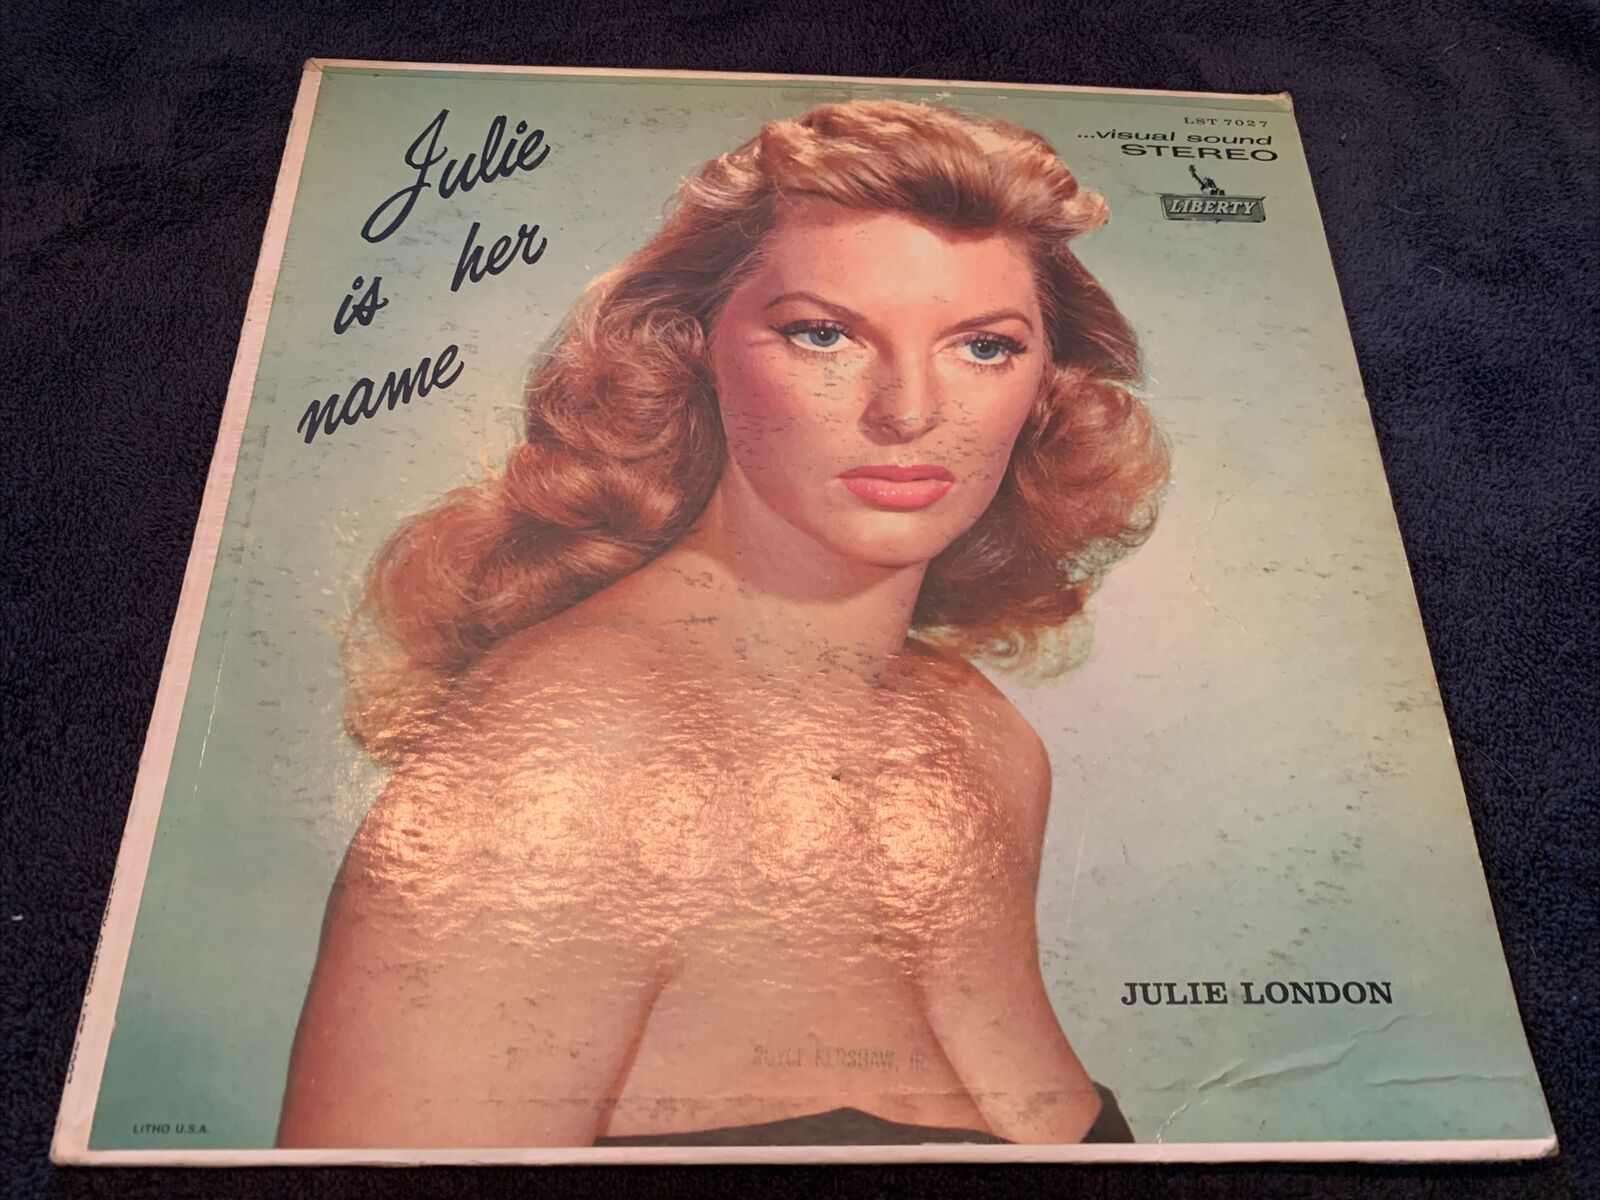 VINYL RECORD LP JULIE LONDON JULIE IS HER NAME LIBERTY RECORDS LST-7027